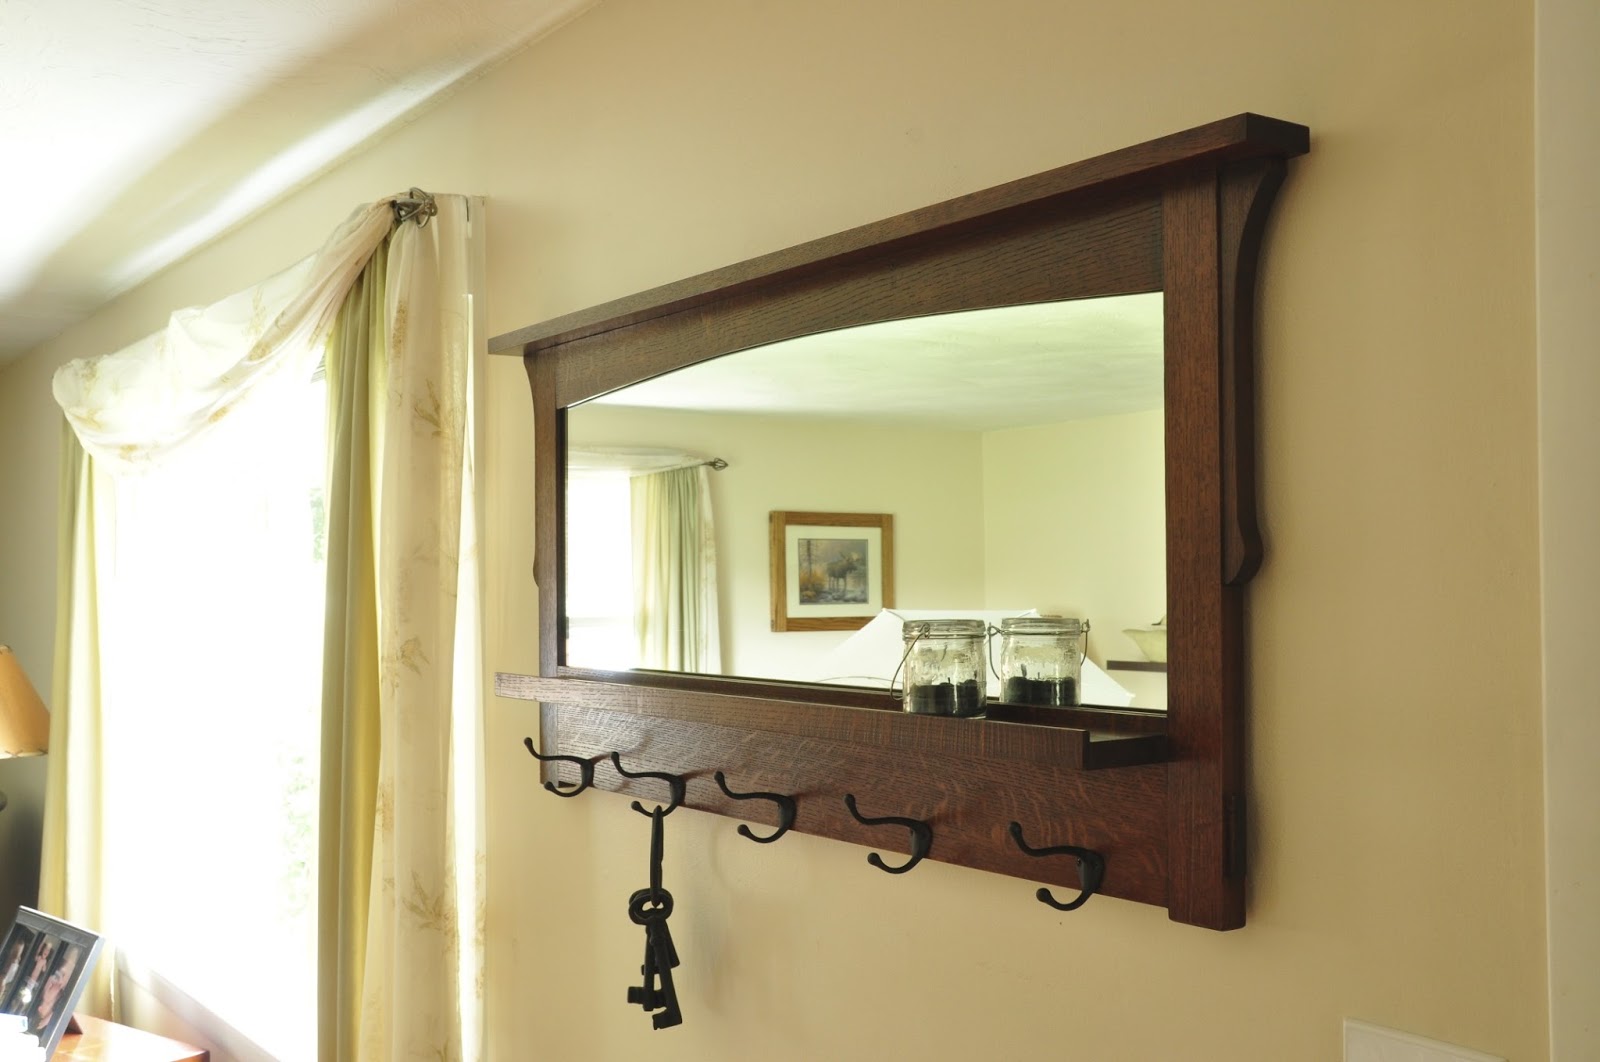 Honey Do Woodworking: Arts & Crafts Entry Bench & Mirror Project